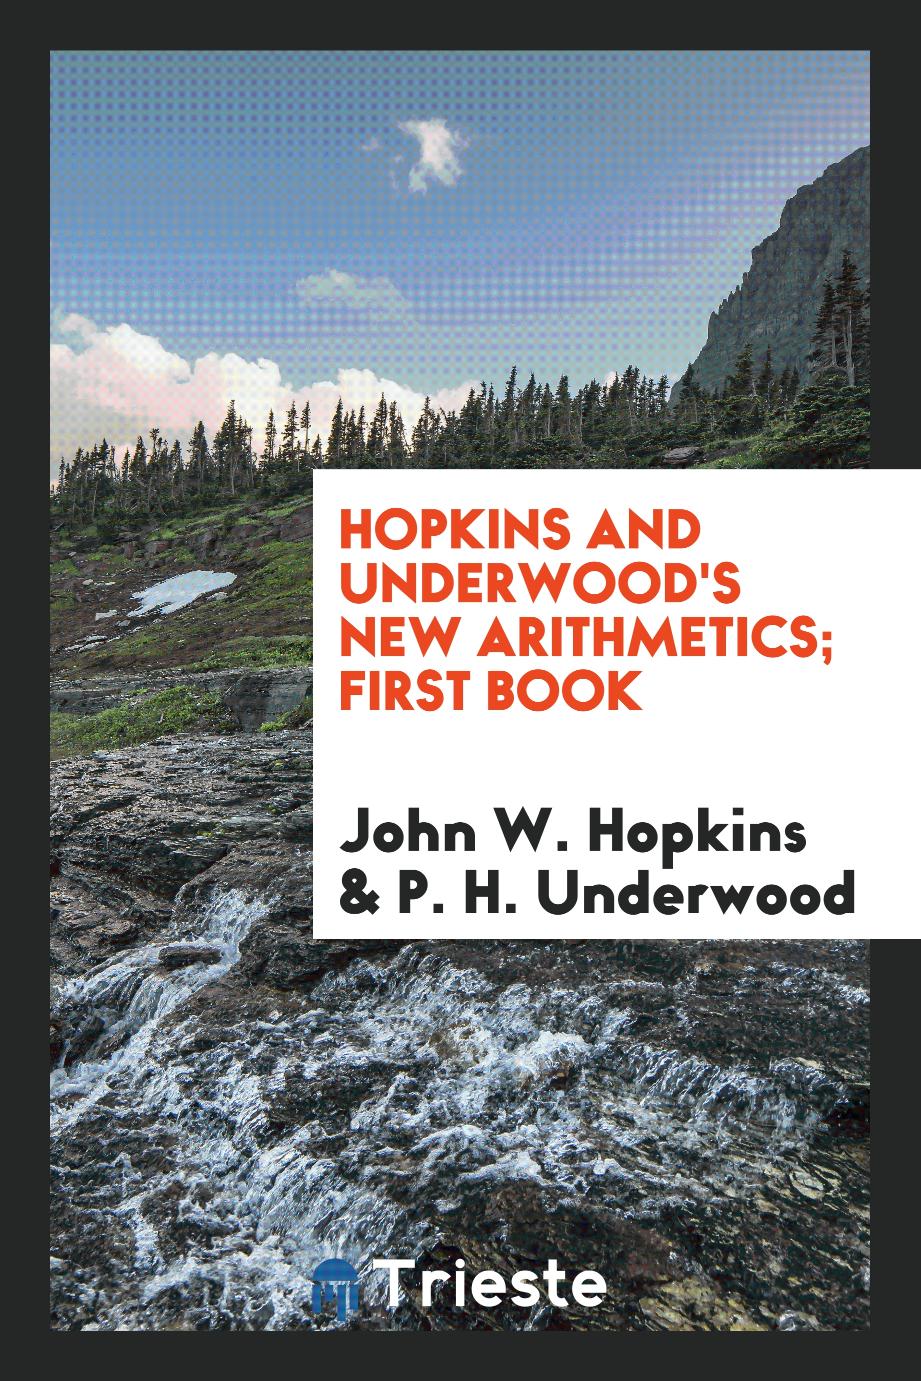 Hopkins and Underwood's new arithmetics; first book